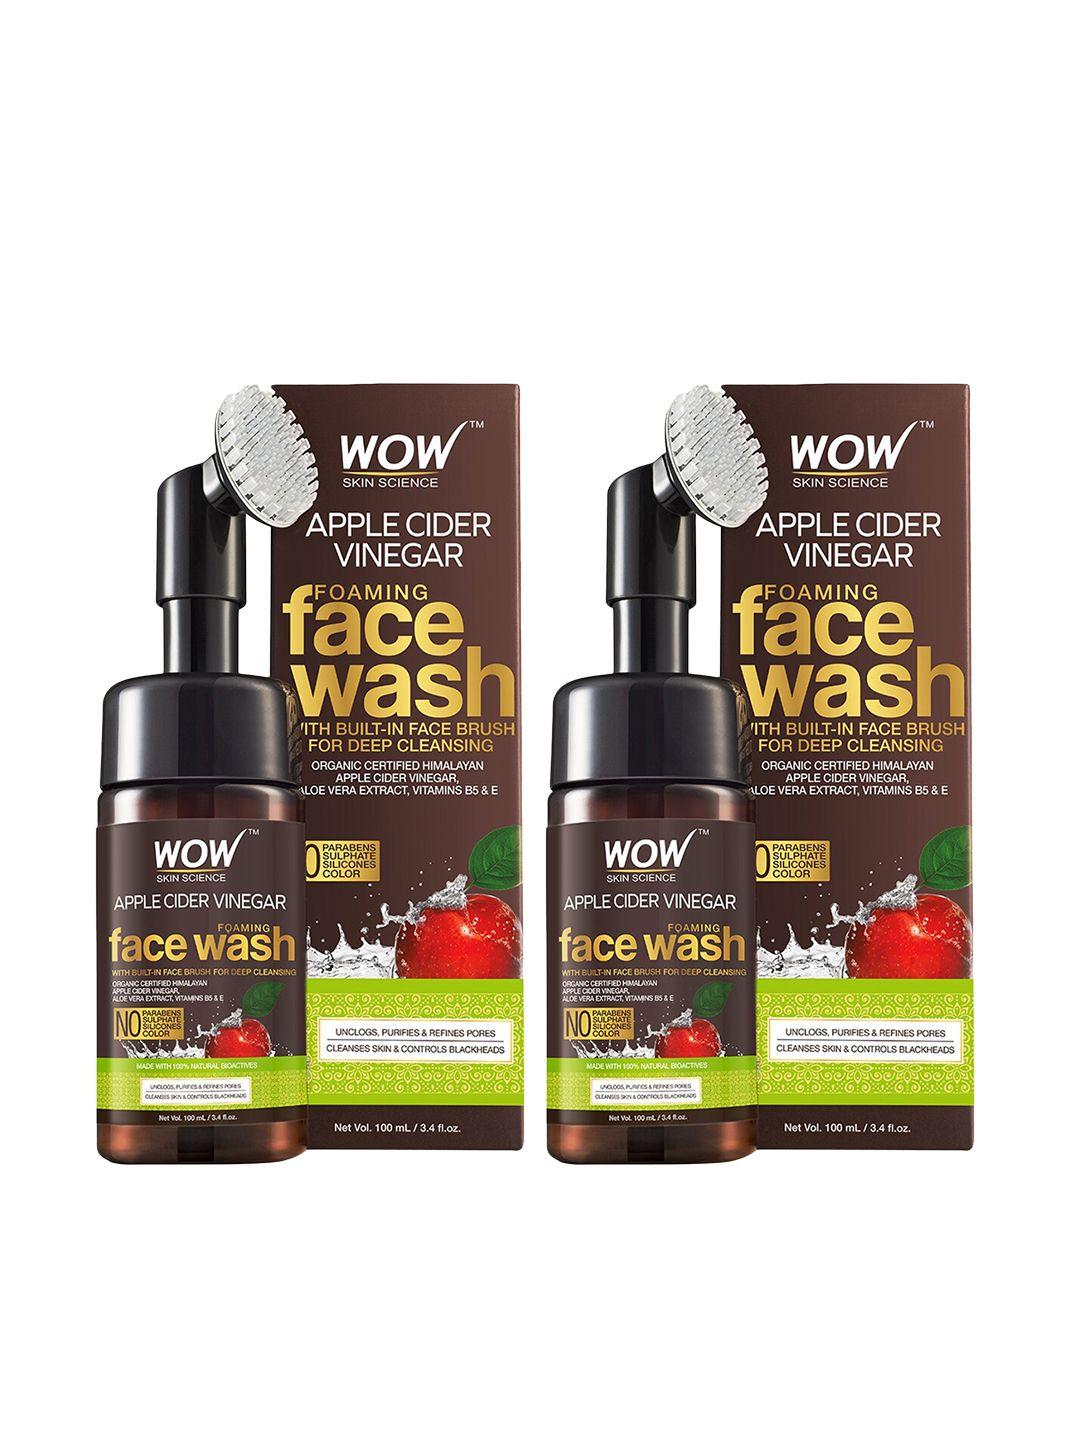 wow skin science set of 2 apple cider vinegar foaming face wash with built-in brush